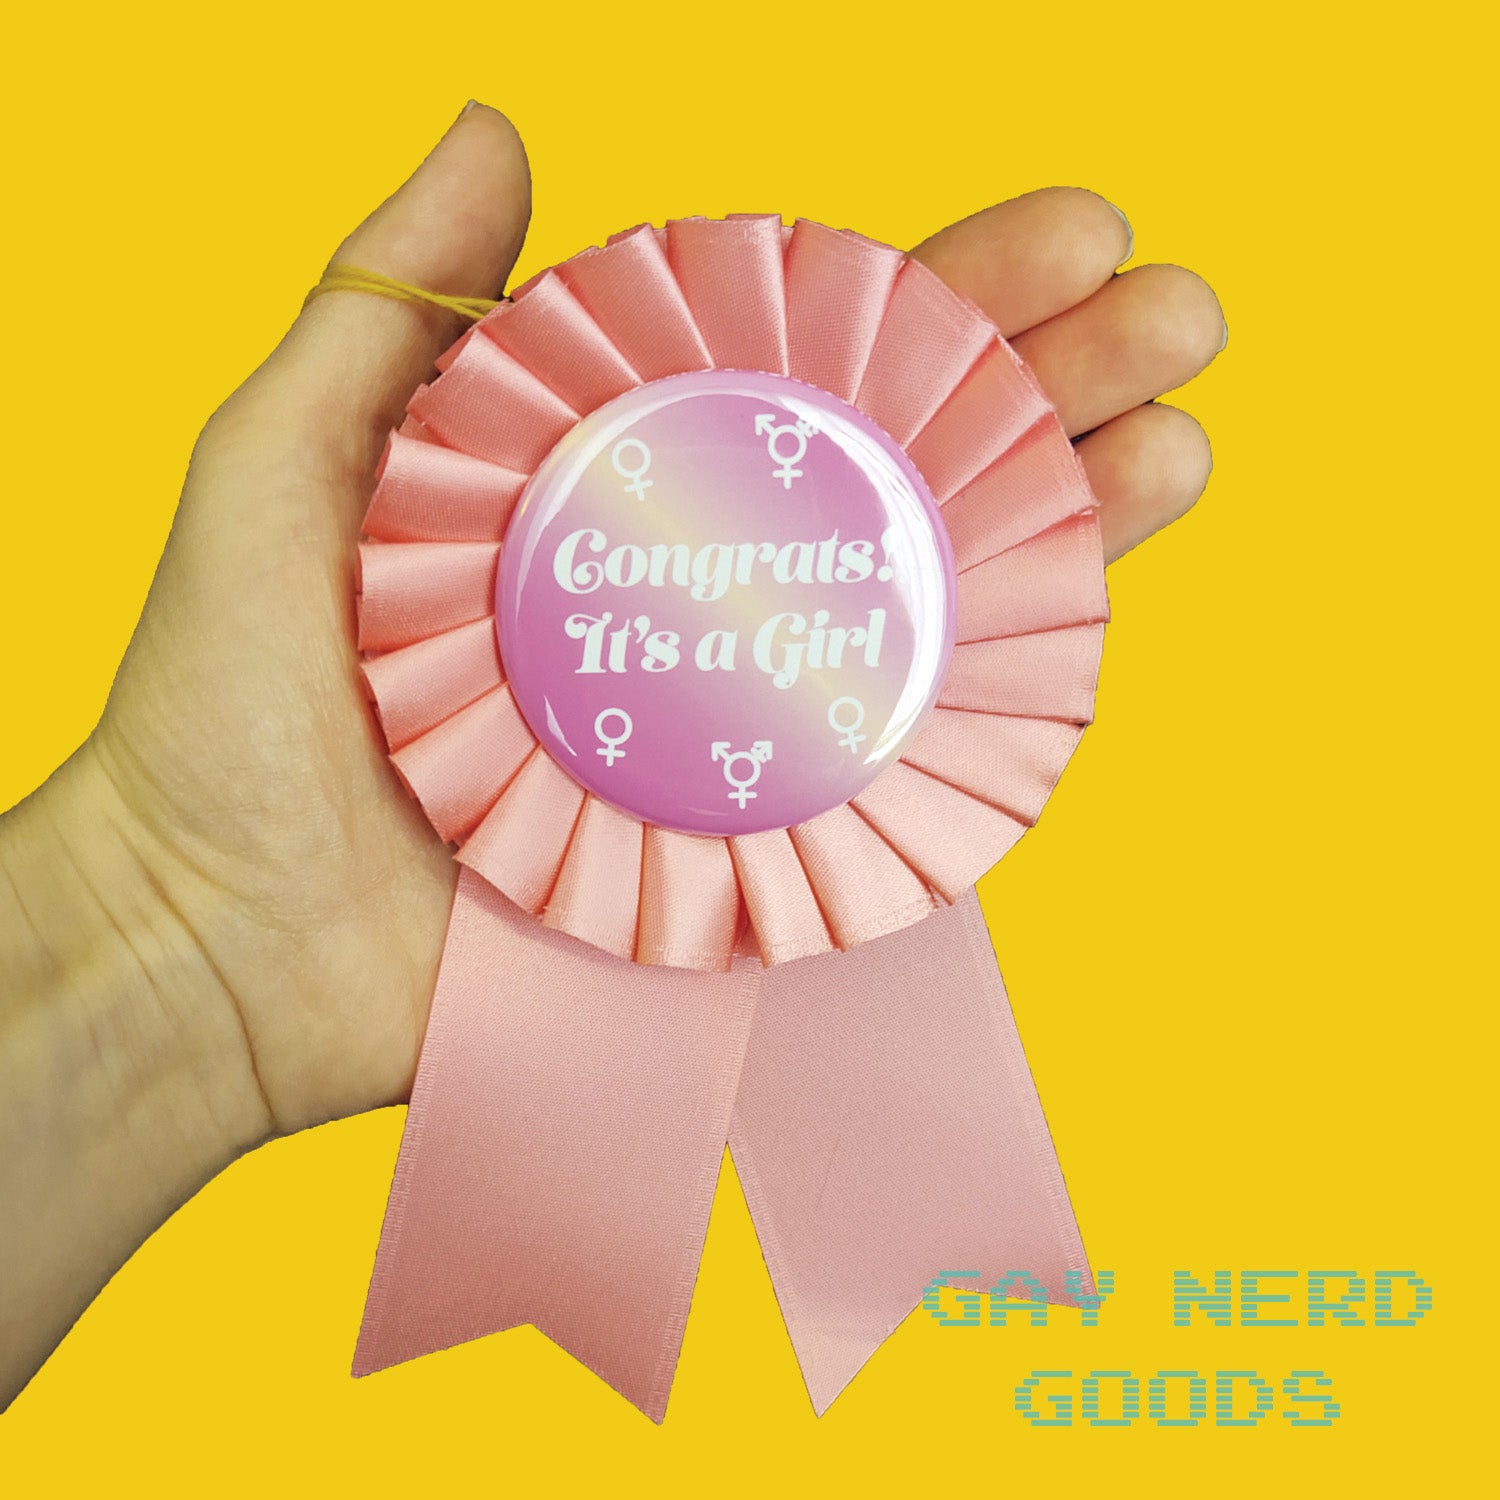 hand holding the "congrats! it's a girl" award rosette on a yellow background